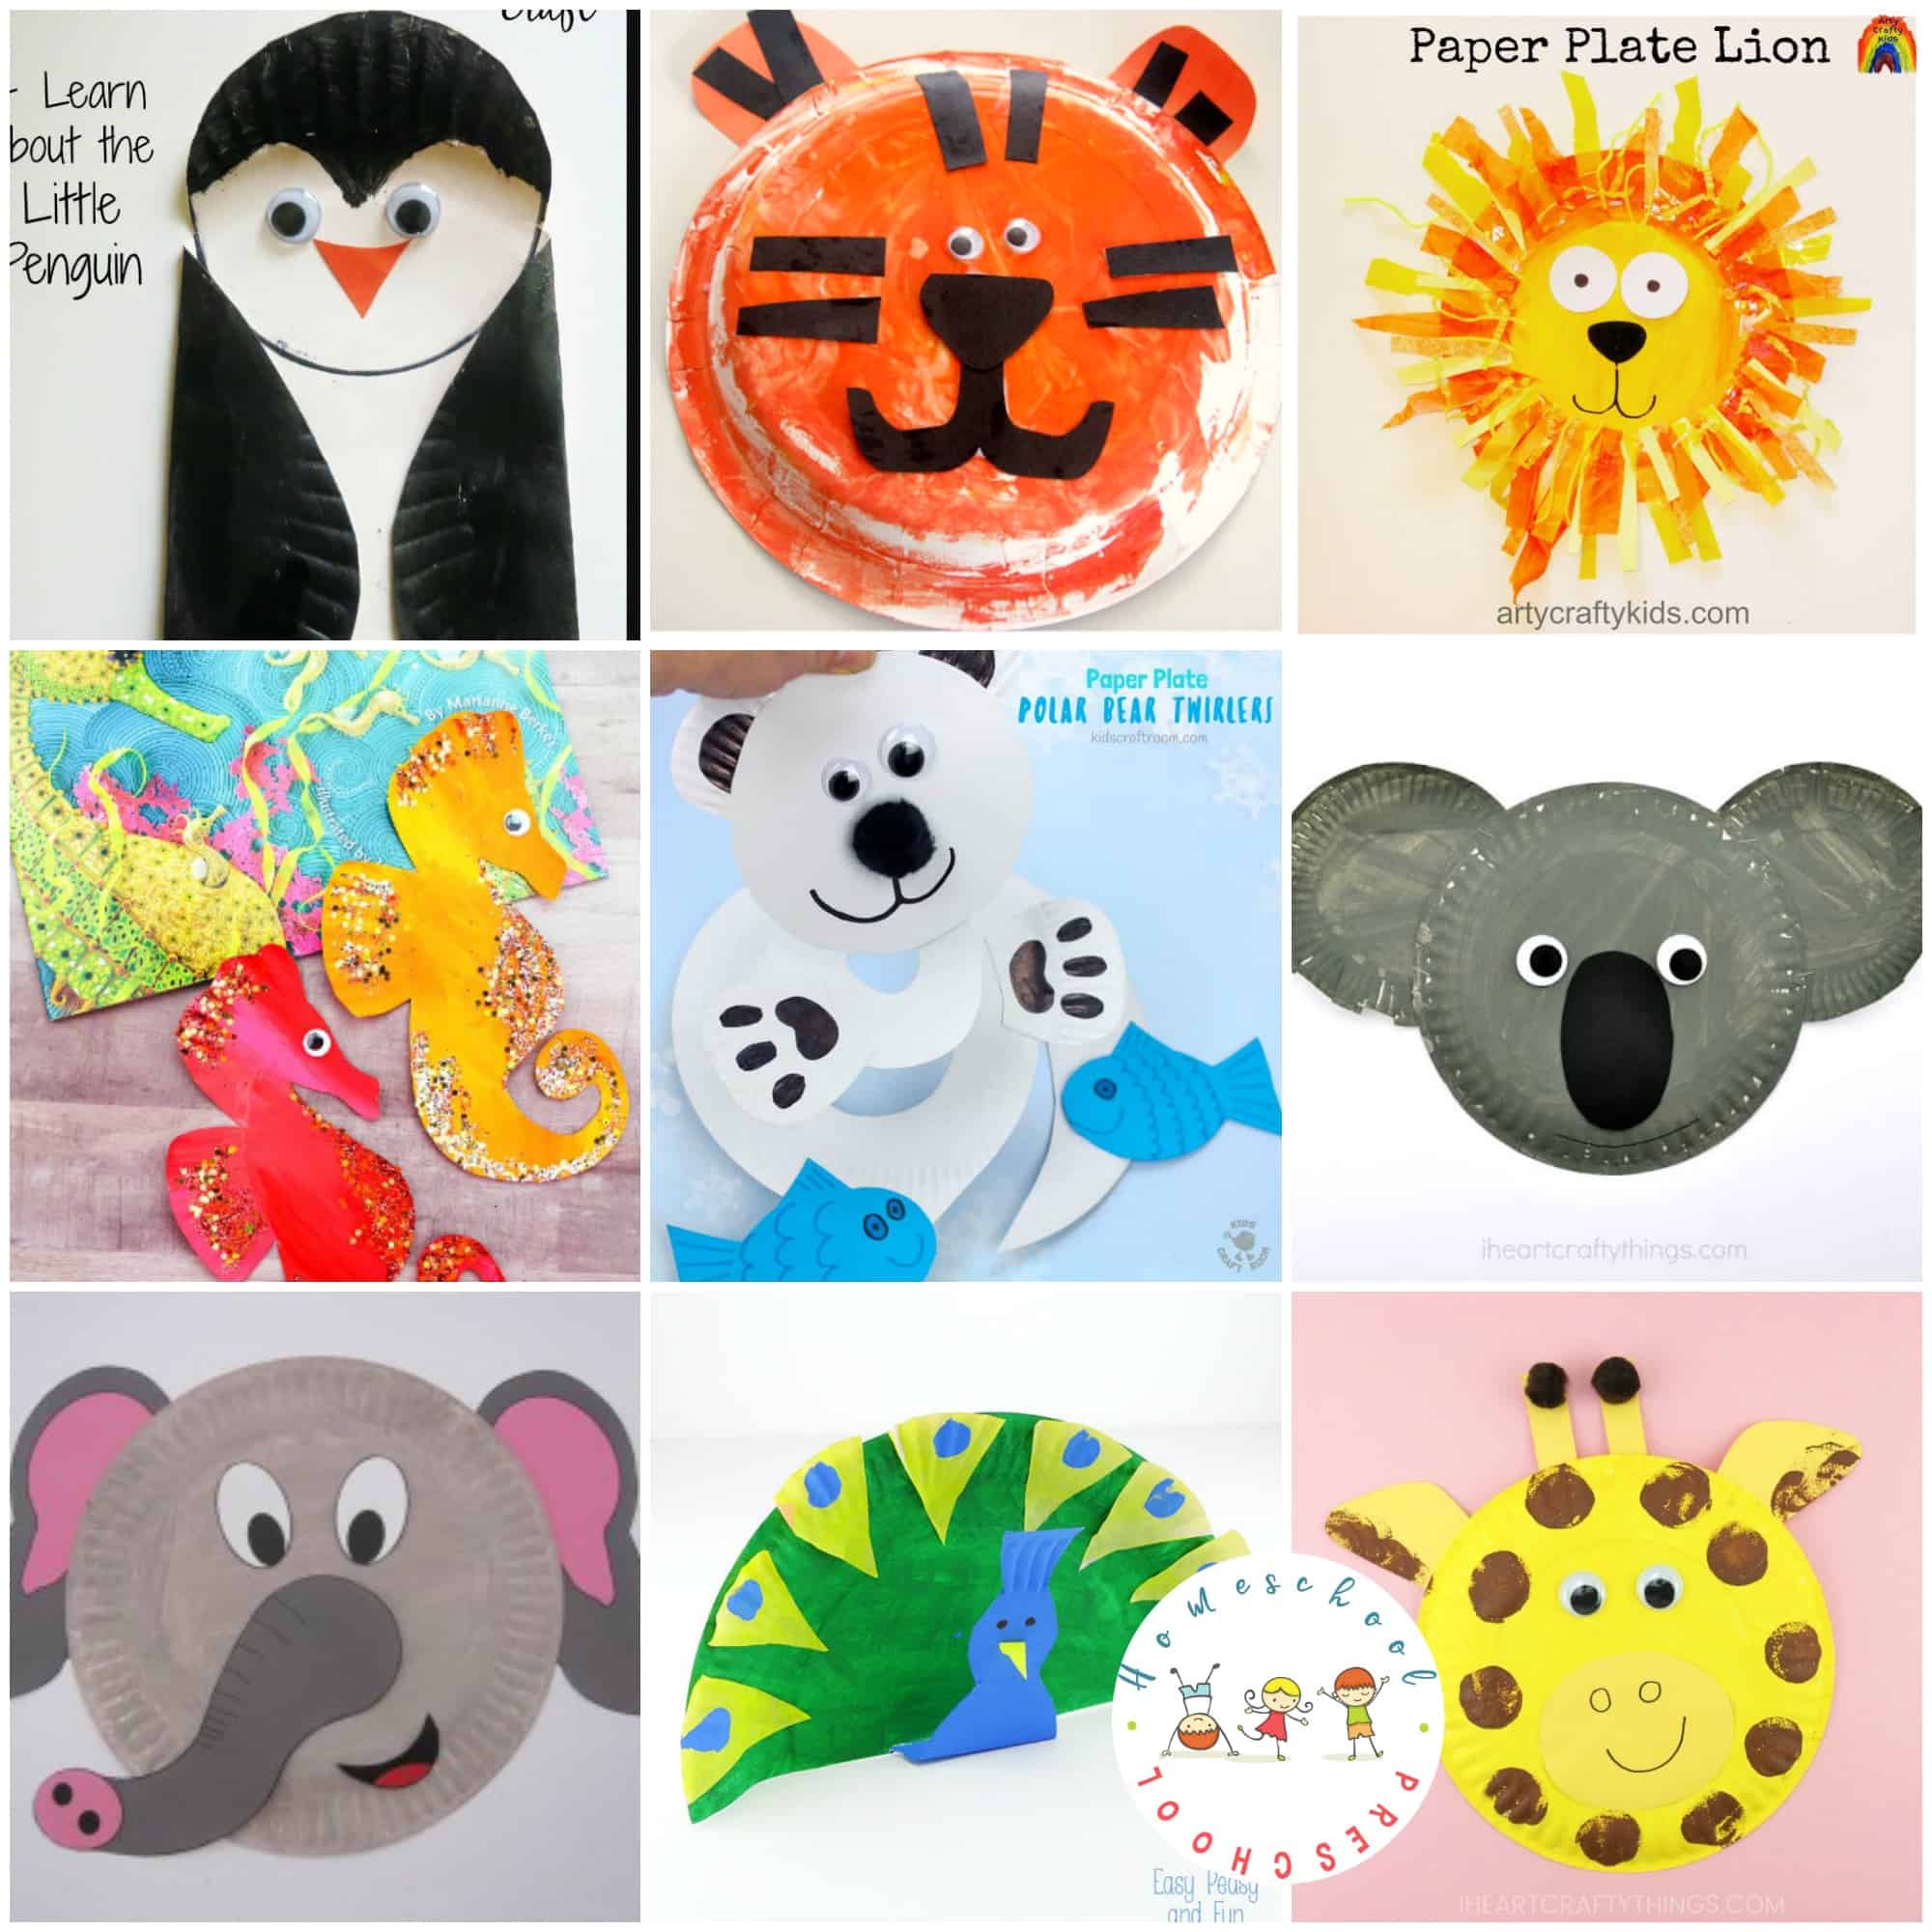 25 Awesome Zoo Animal Paper Plate Crafts for Kids